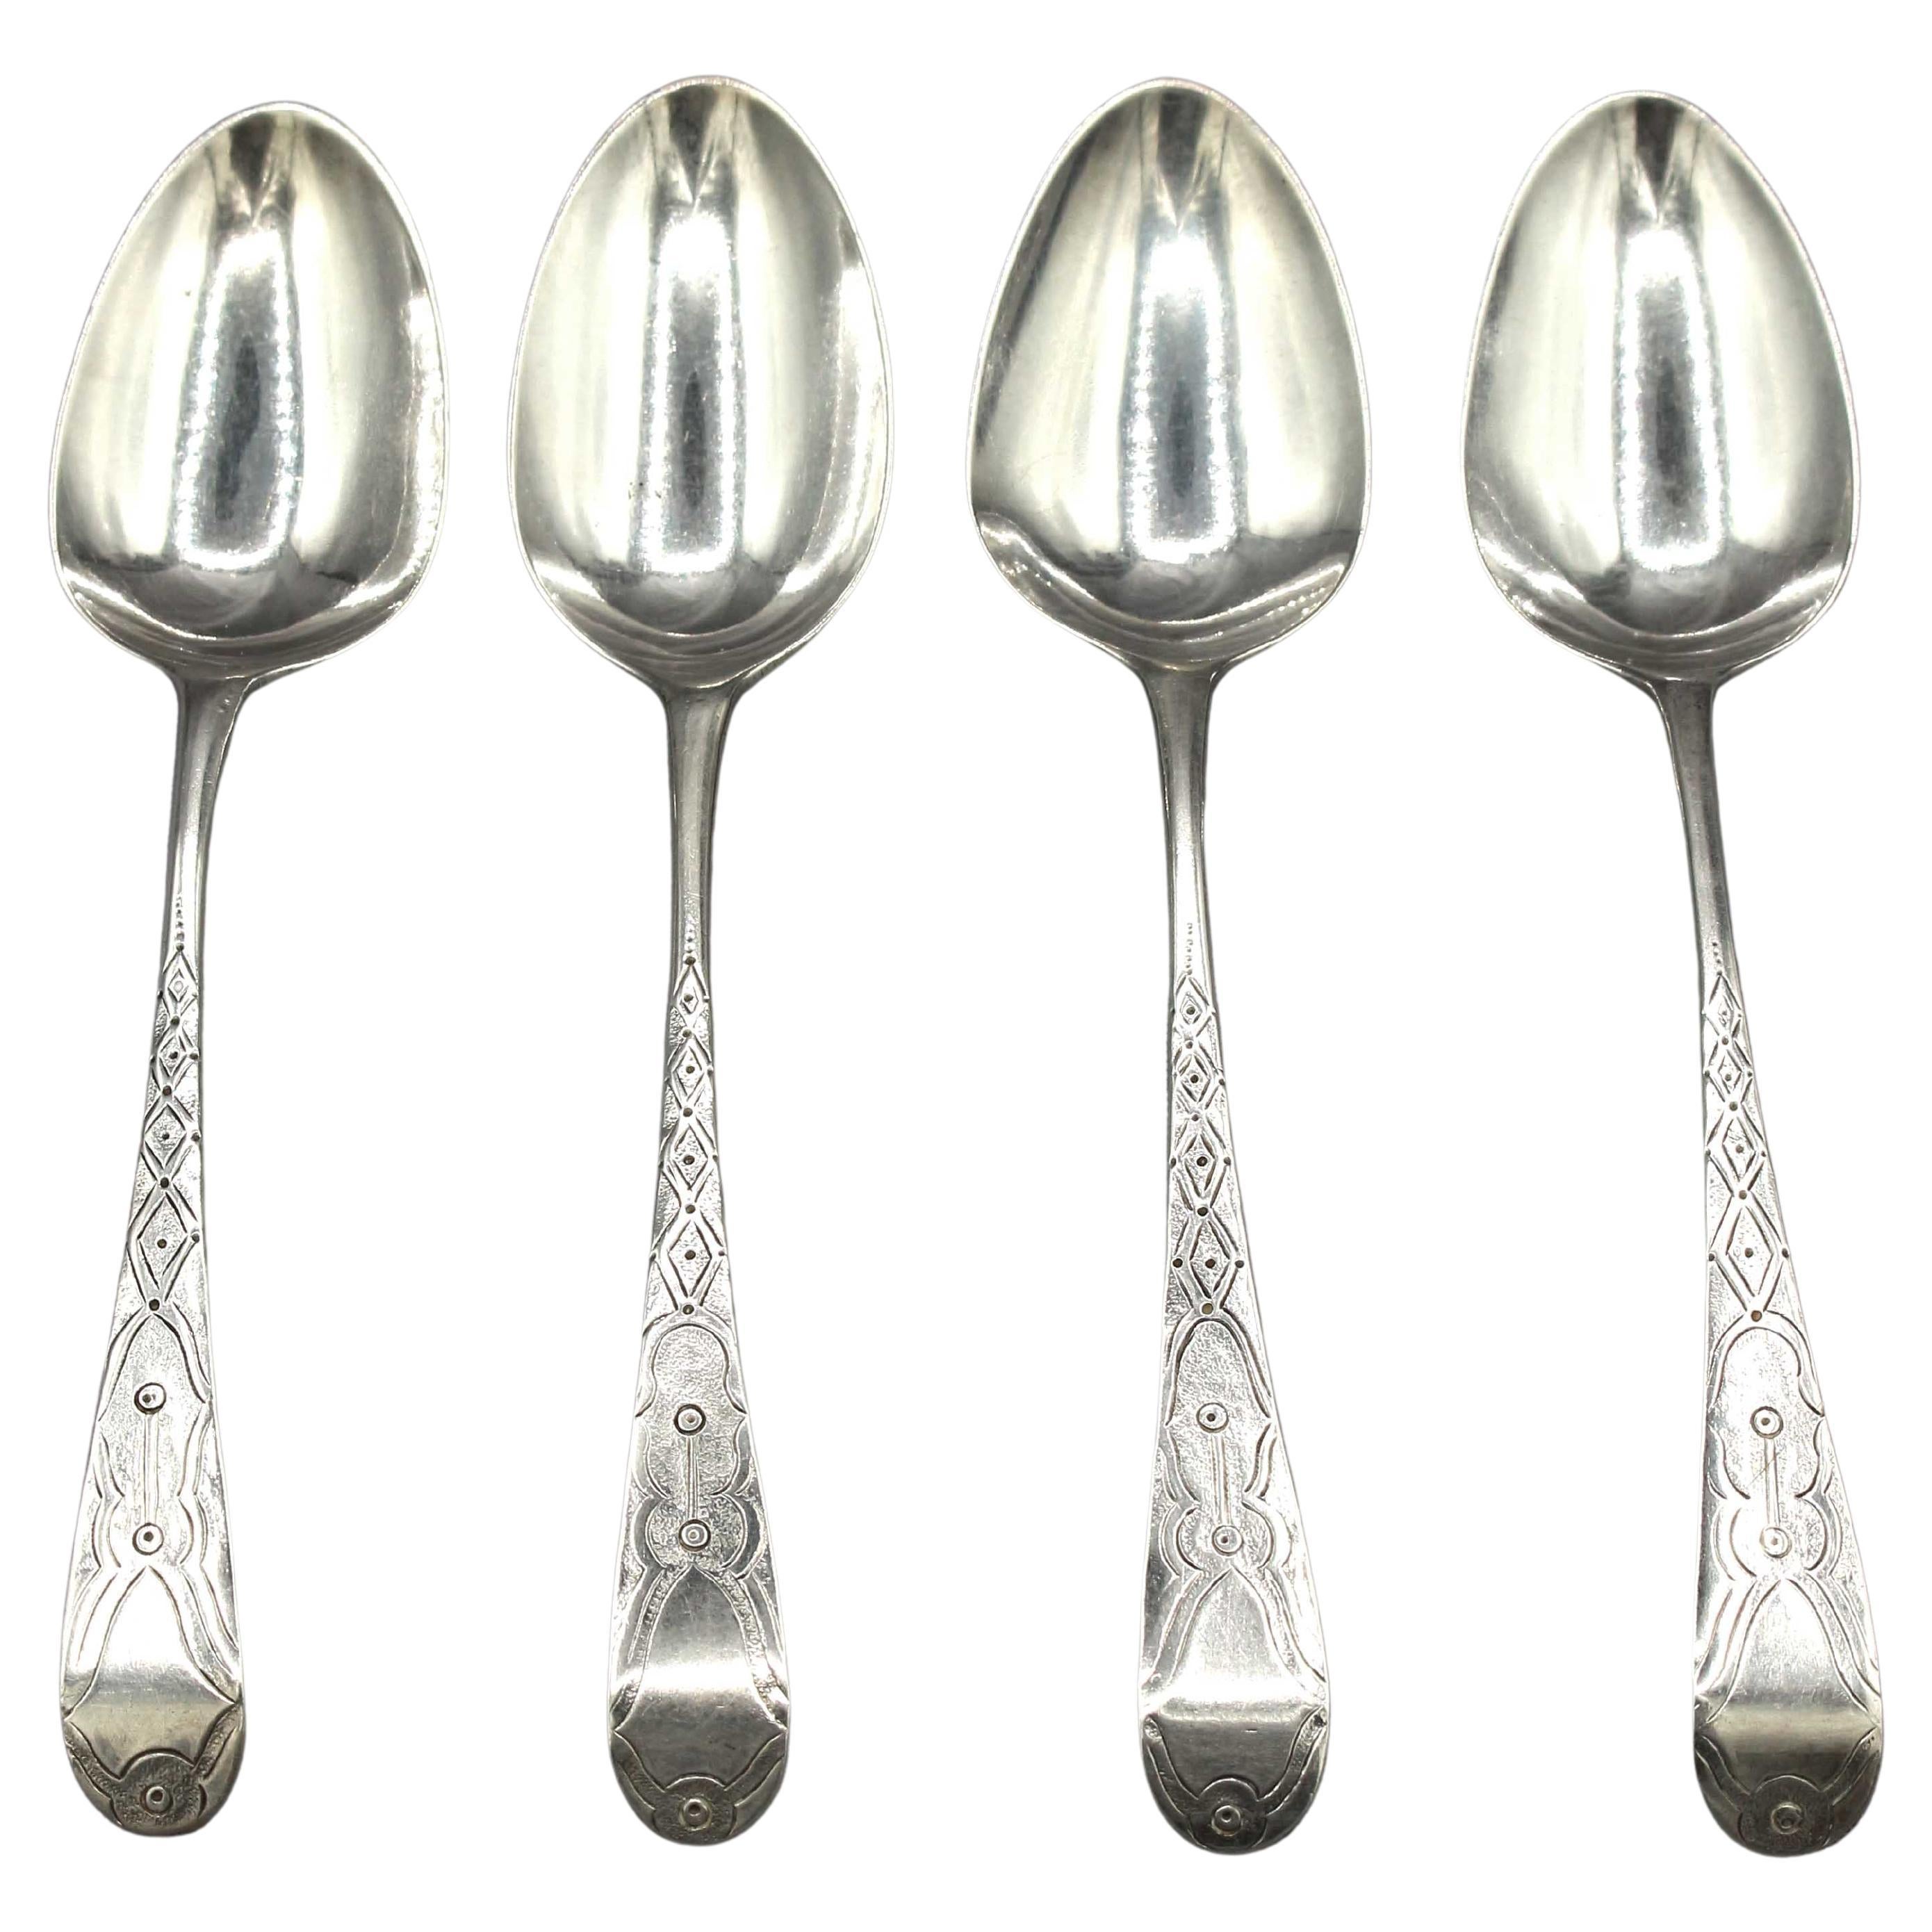 Set of 4 Sterling Silver Coffee Spoons by Hester Bateman, London, c.1775 For Sale